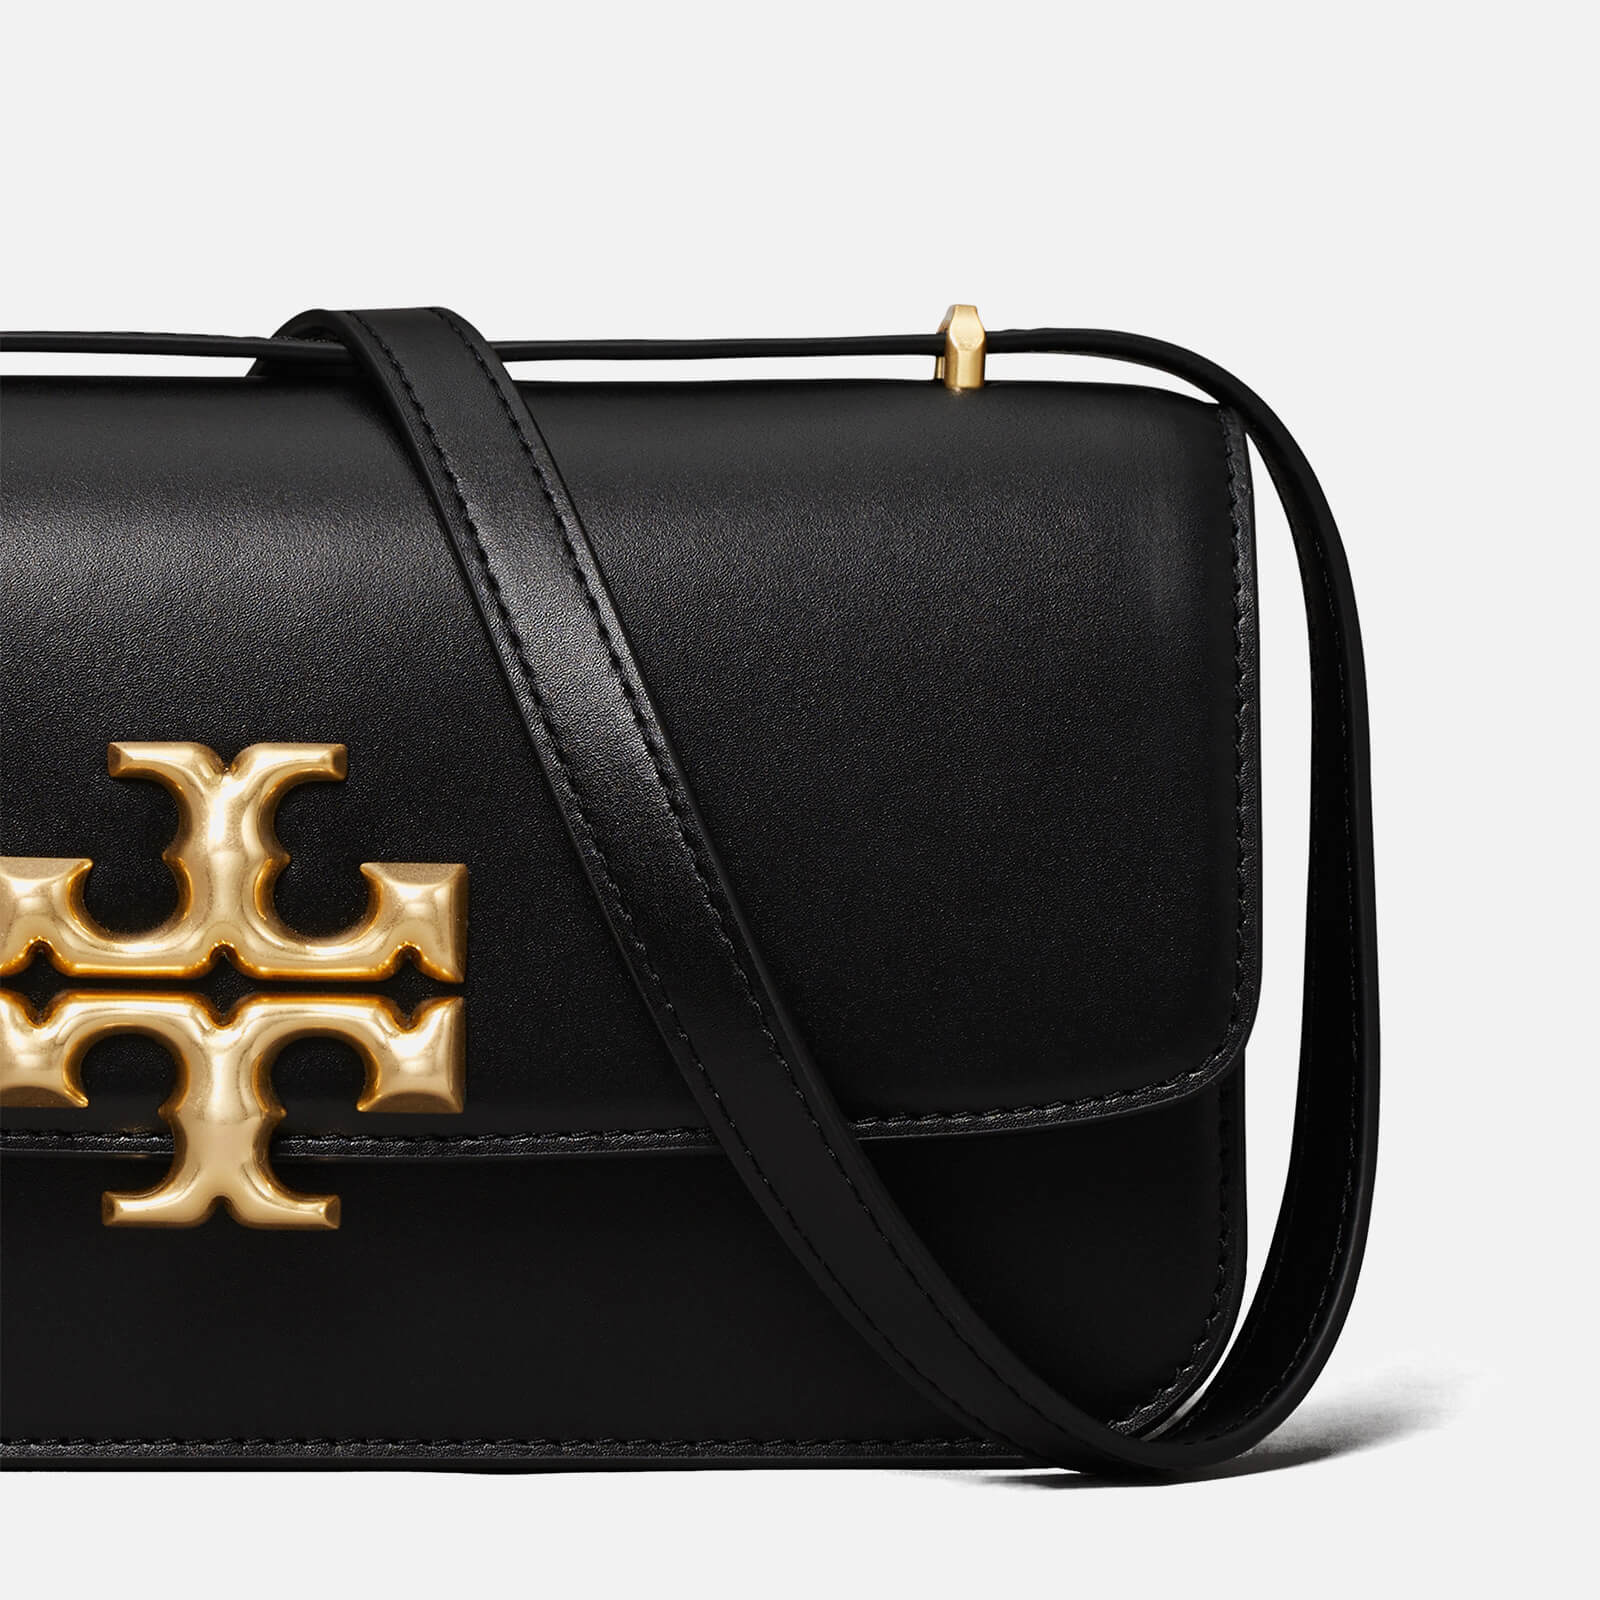 tory burch small eleanor leather bag